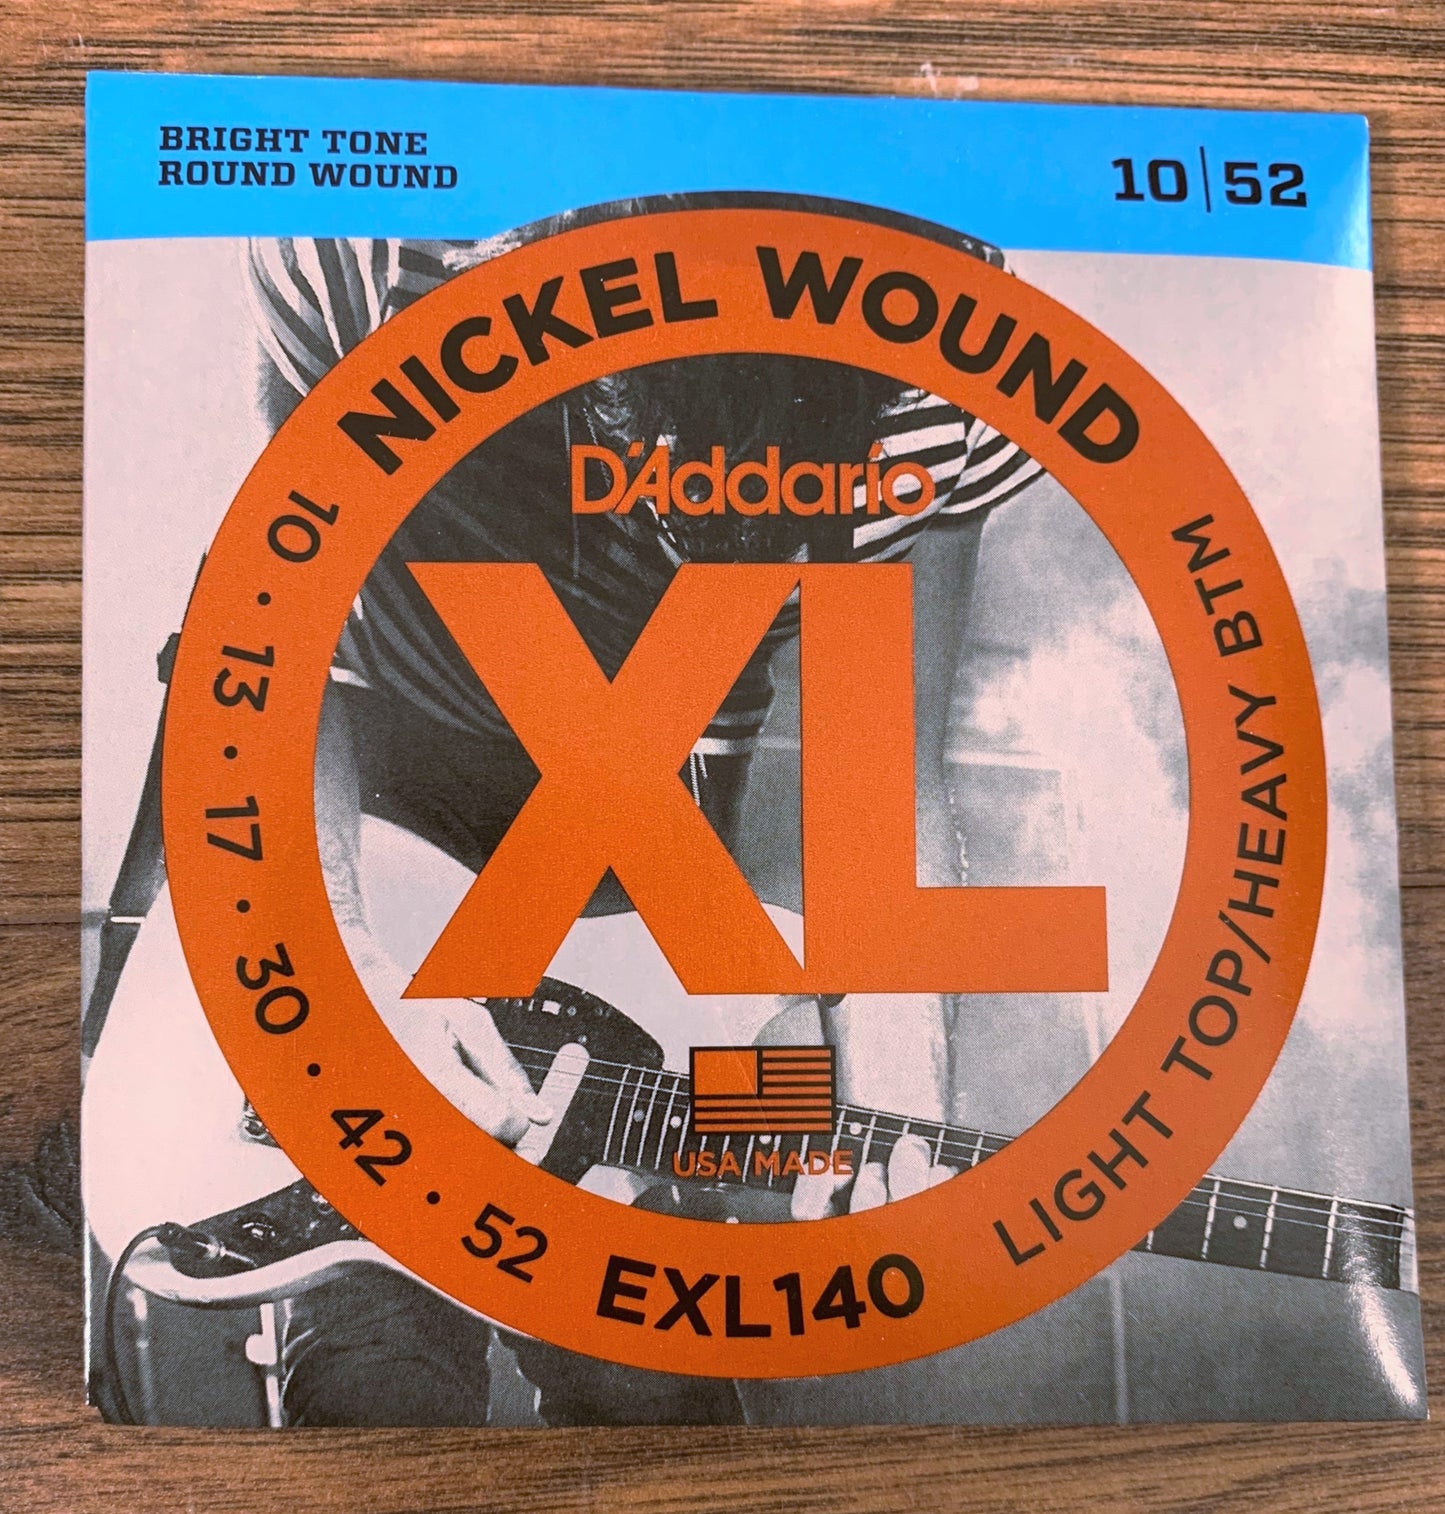 D'Addario EXL140 Light Top Heavy Bottom Nickel Wound Electric Guitar Strings 10-52 3 Pack